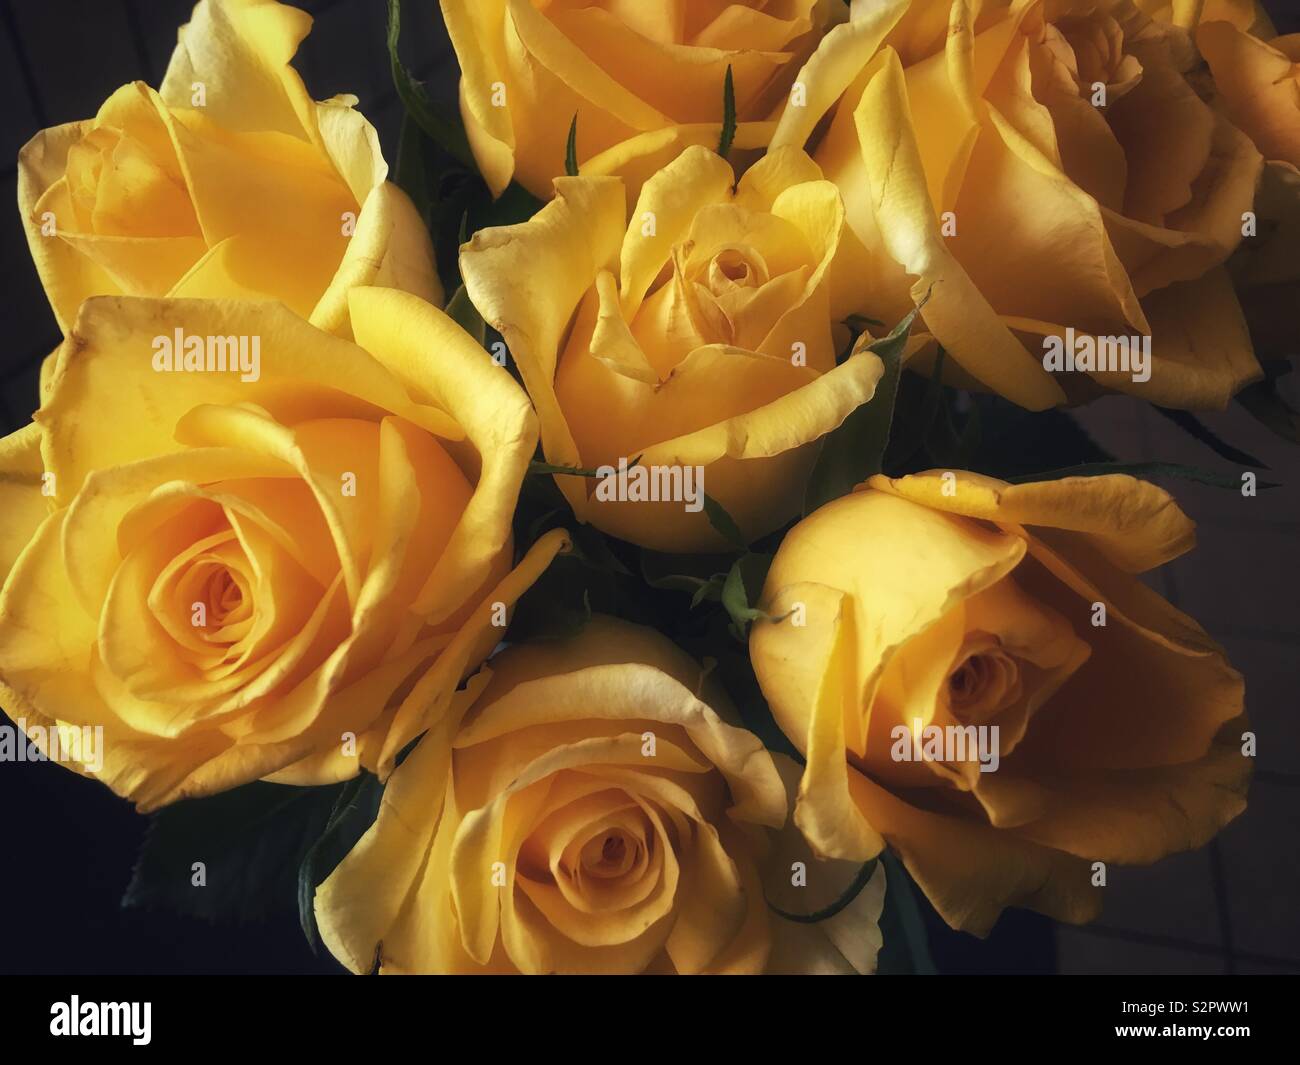 A bunch of faded yellow roses lit by window light. Stock Photo